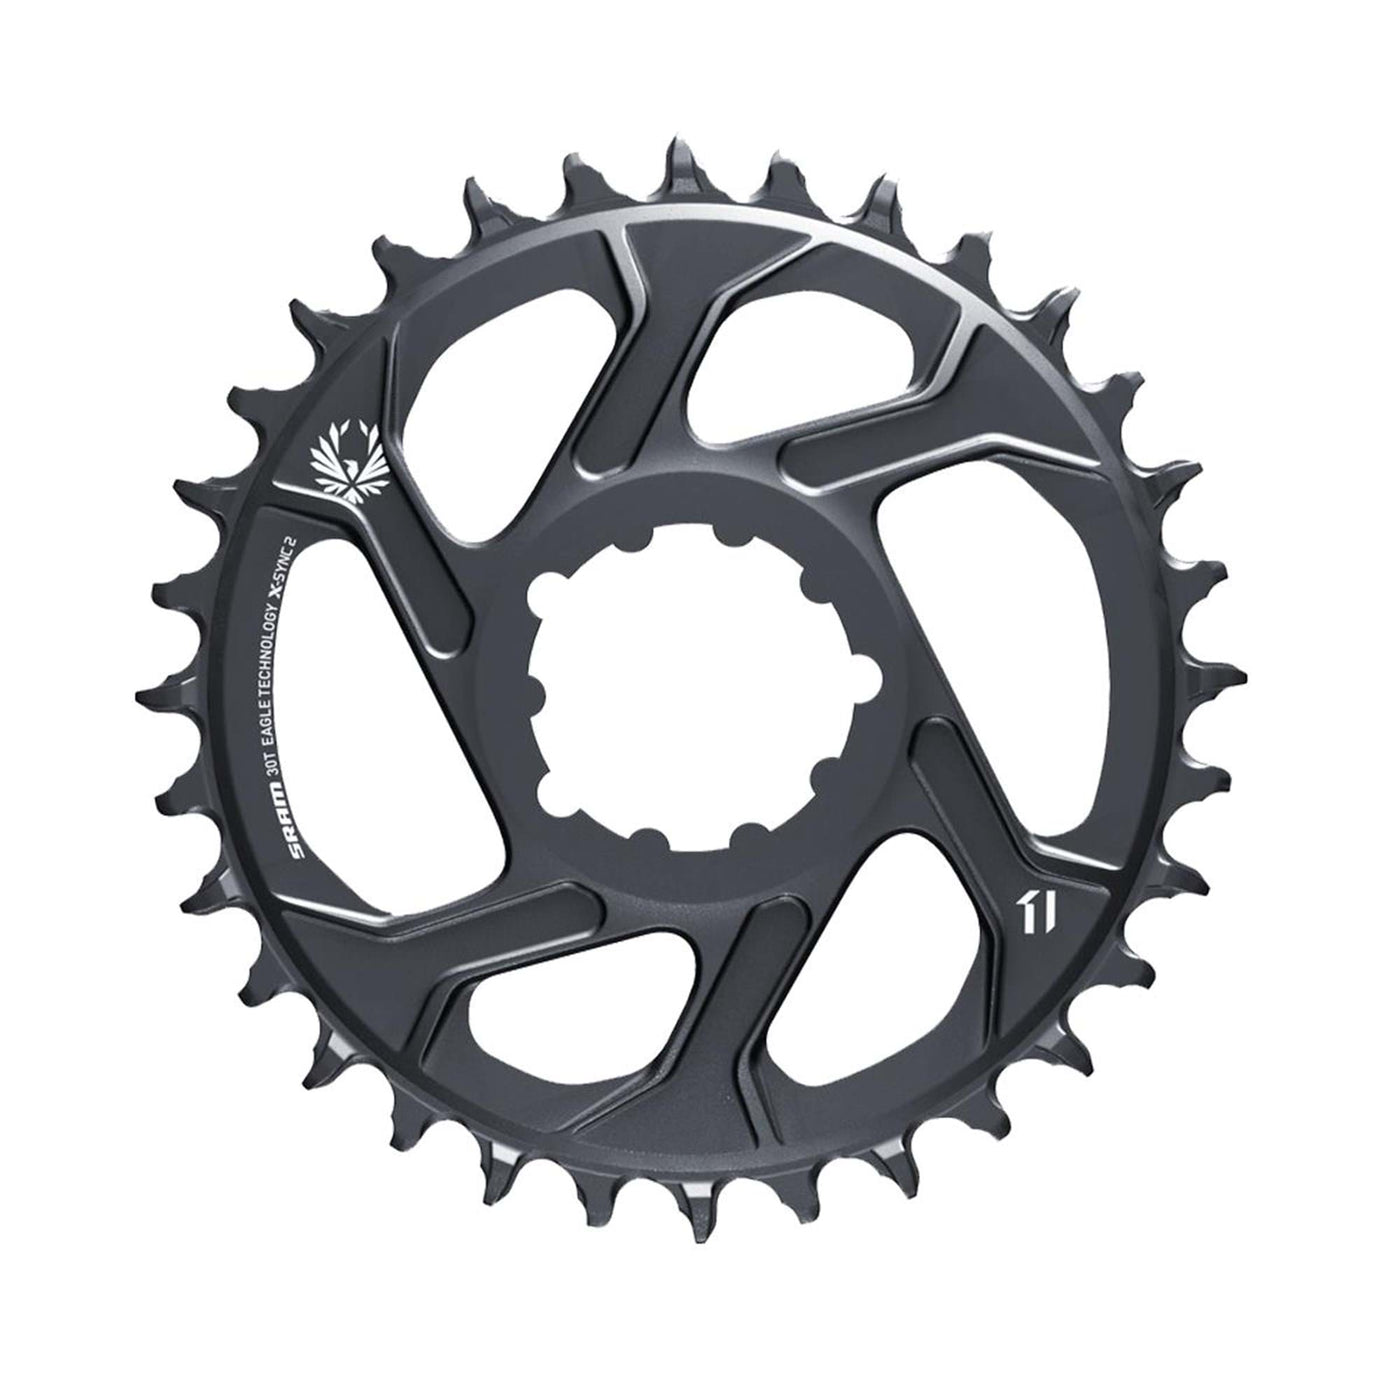 SRAM X-SYNC 2 Direct Mount Eagle Chain Ring